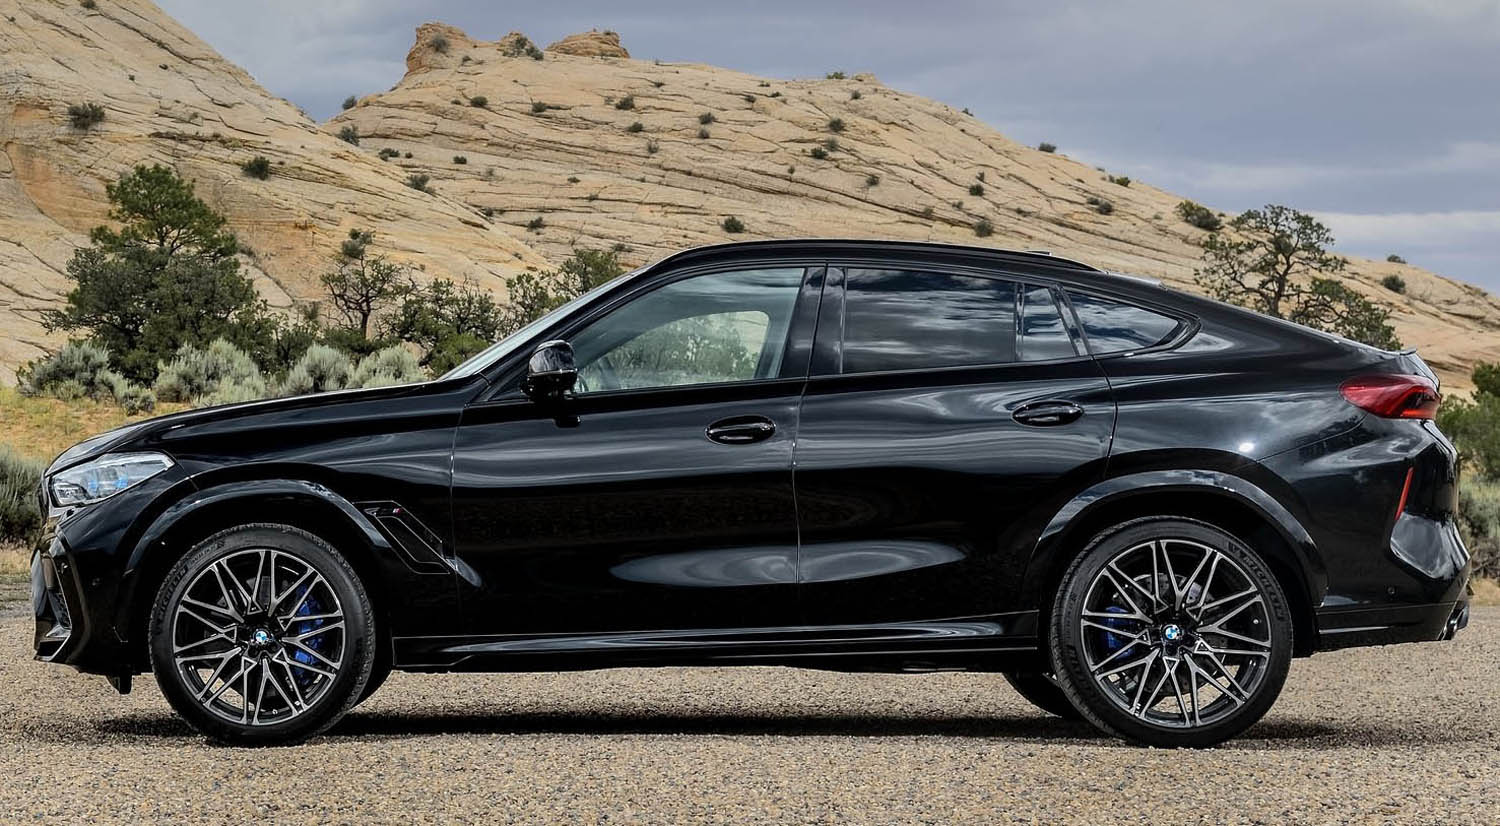 Fabspeed Drops Multiple Parts In E71 BMW X6 M While Keeping The Design  Subtle